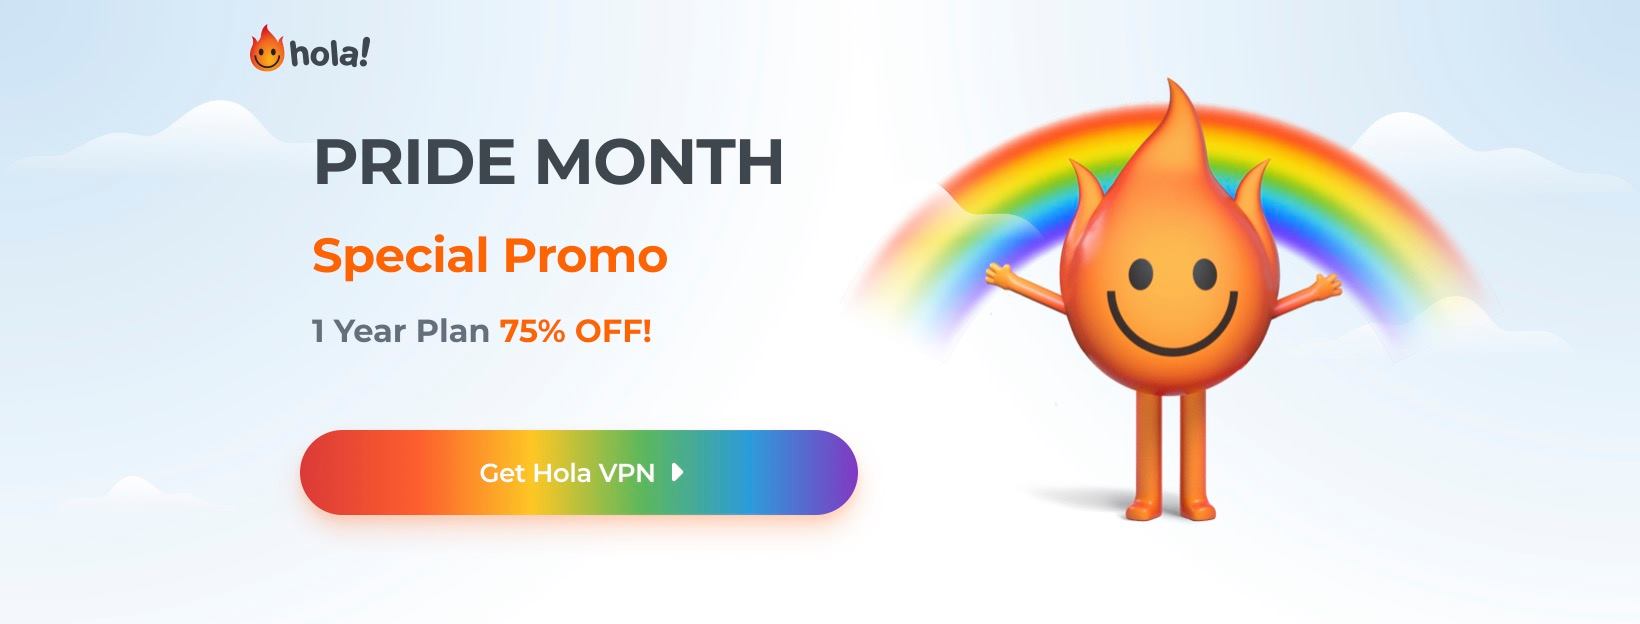 Hola VPN pricing discount